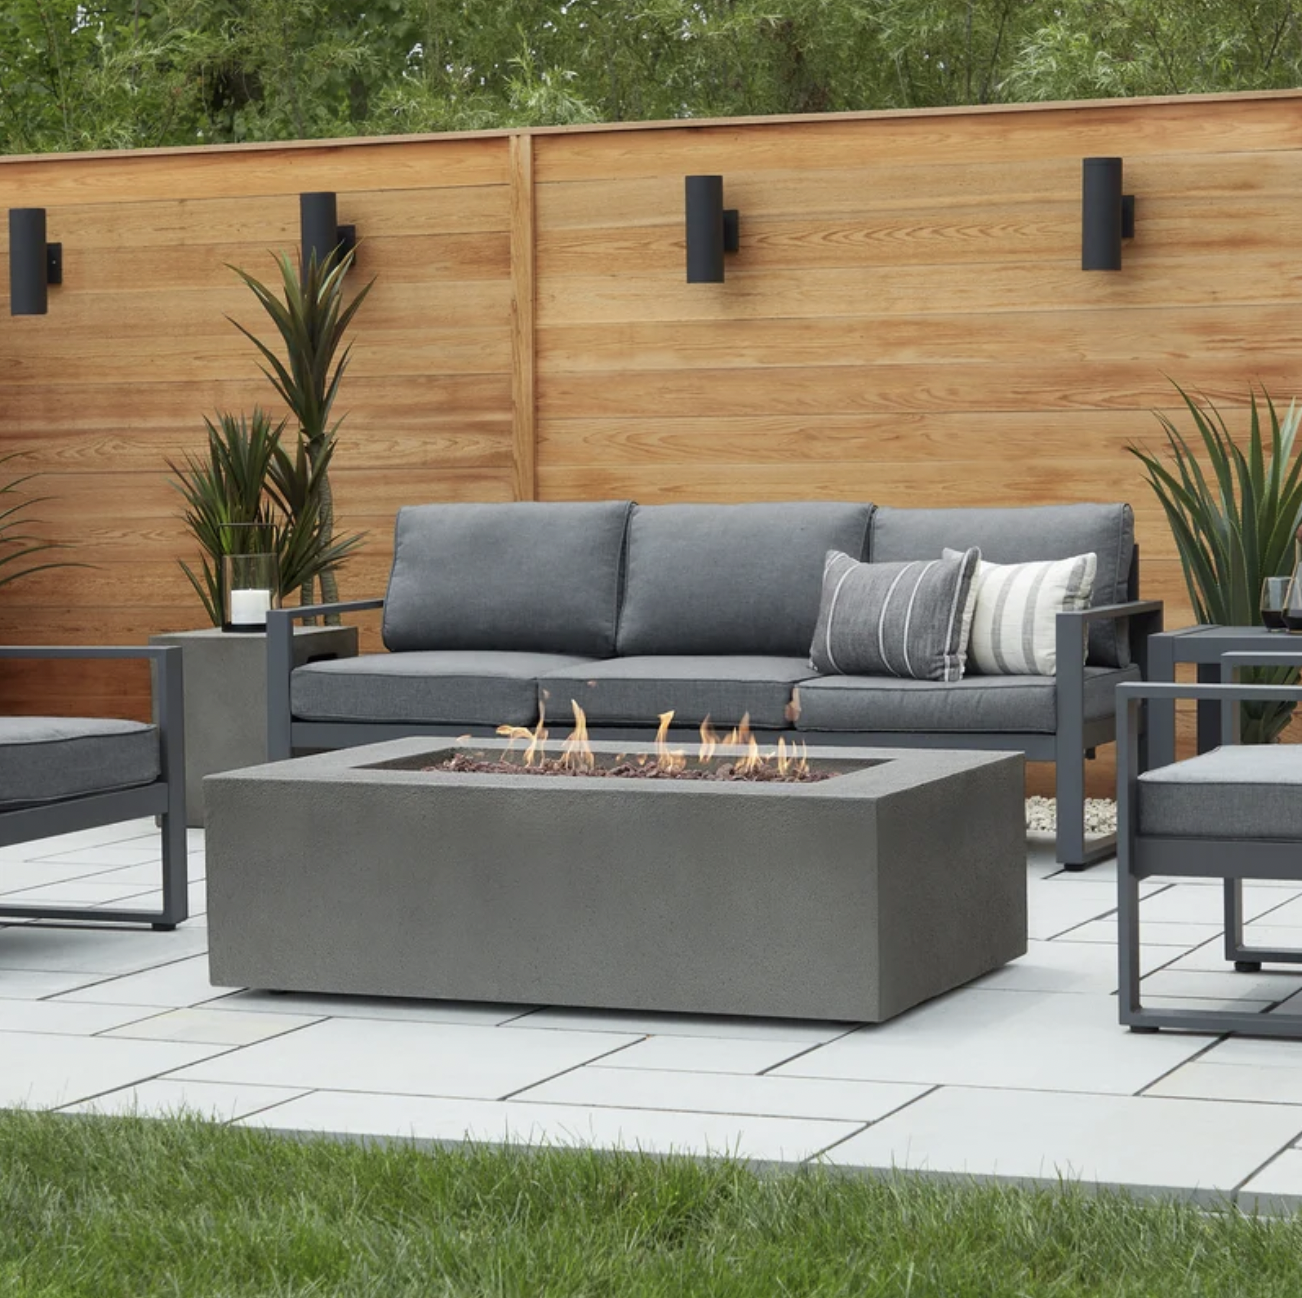 Baltic Concrete Fire Pit  - The concrete finish of this rectangular propane gas fire pit table will blend well with warm, modern landscaping. Spacious at more than four feet long, there’s plenty of room for everyone to gather around—and with a 65000 BTU output, plenty of heat as well. SHOP NOW >” loading=”lazy”></noscript><br />
<img decoding=